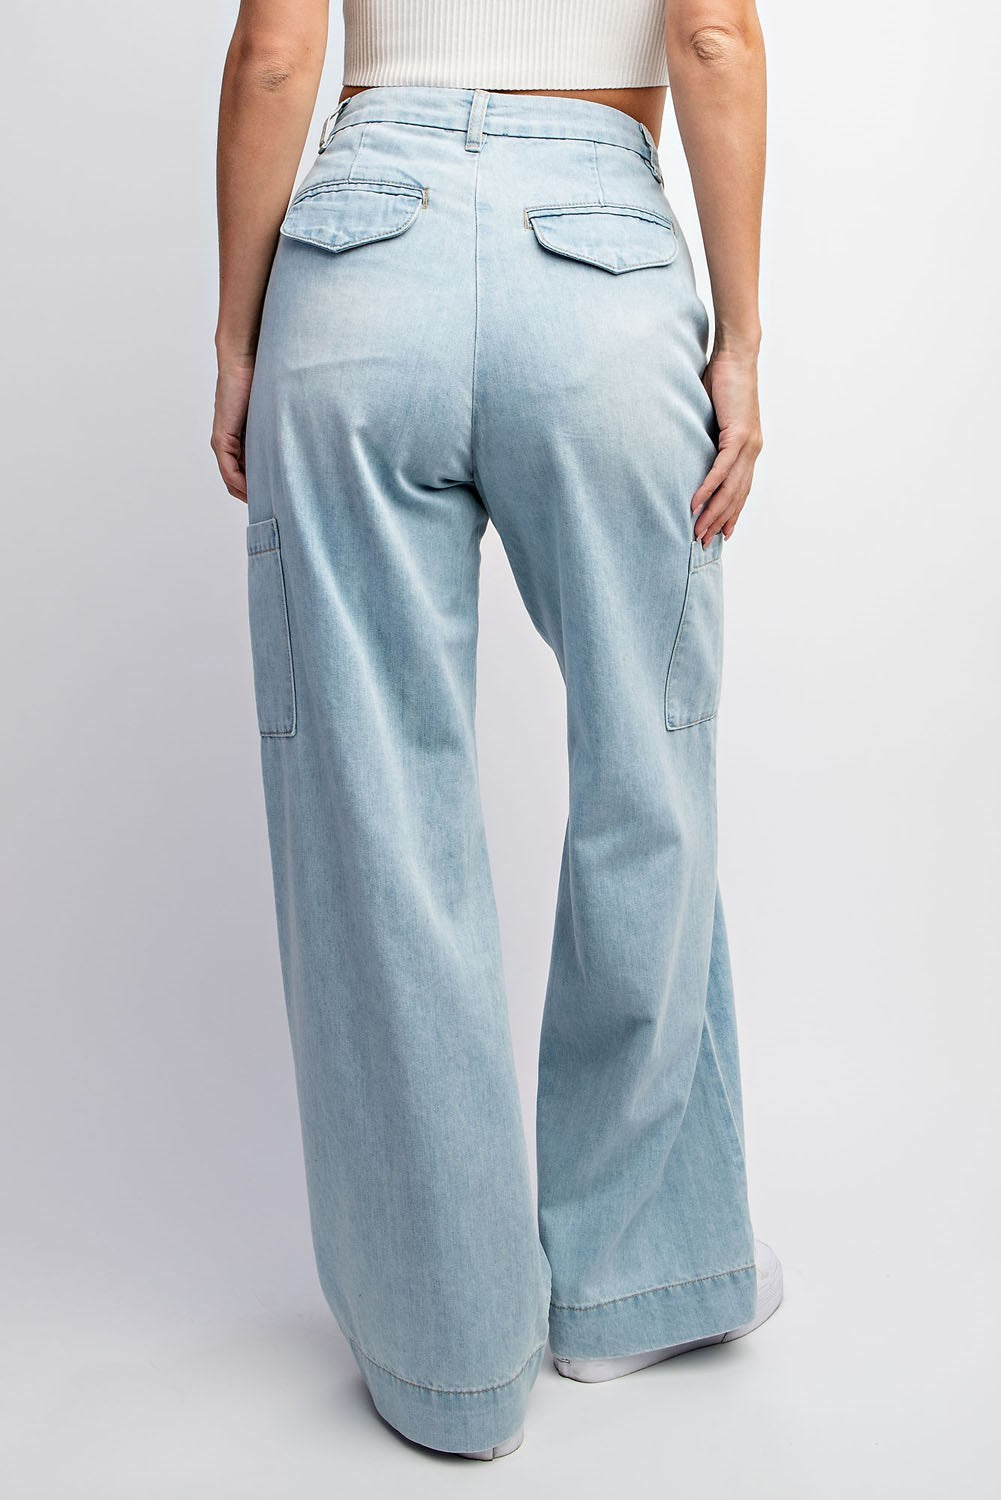 The Courtney Cargo Pants (Small to Large)